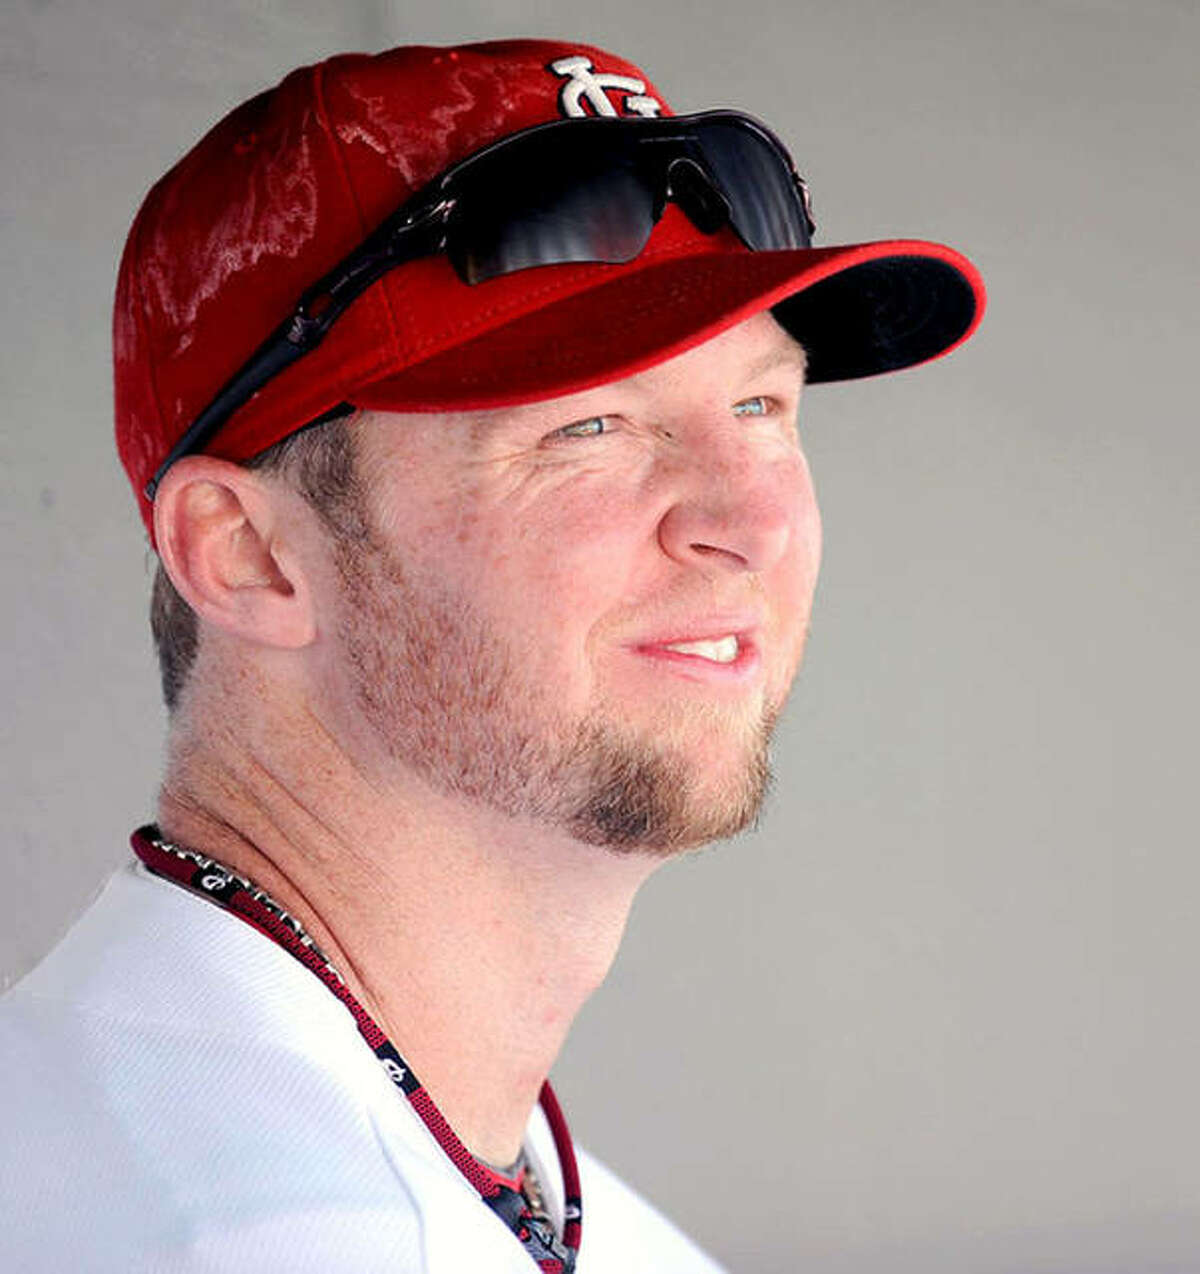 Former Cardinal outfielder Chris Duncan lost his battle with brain cancer Friday at age 38.